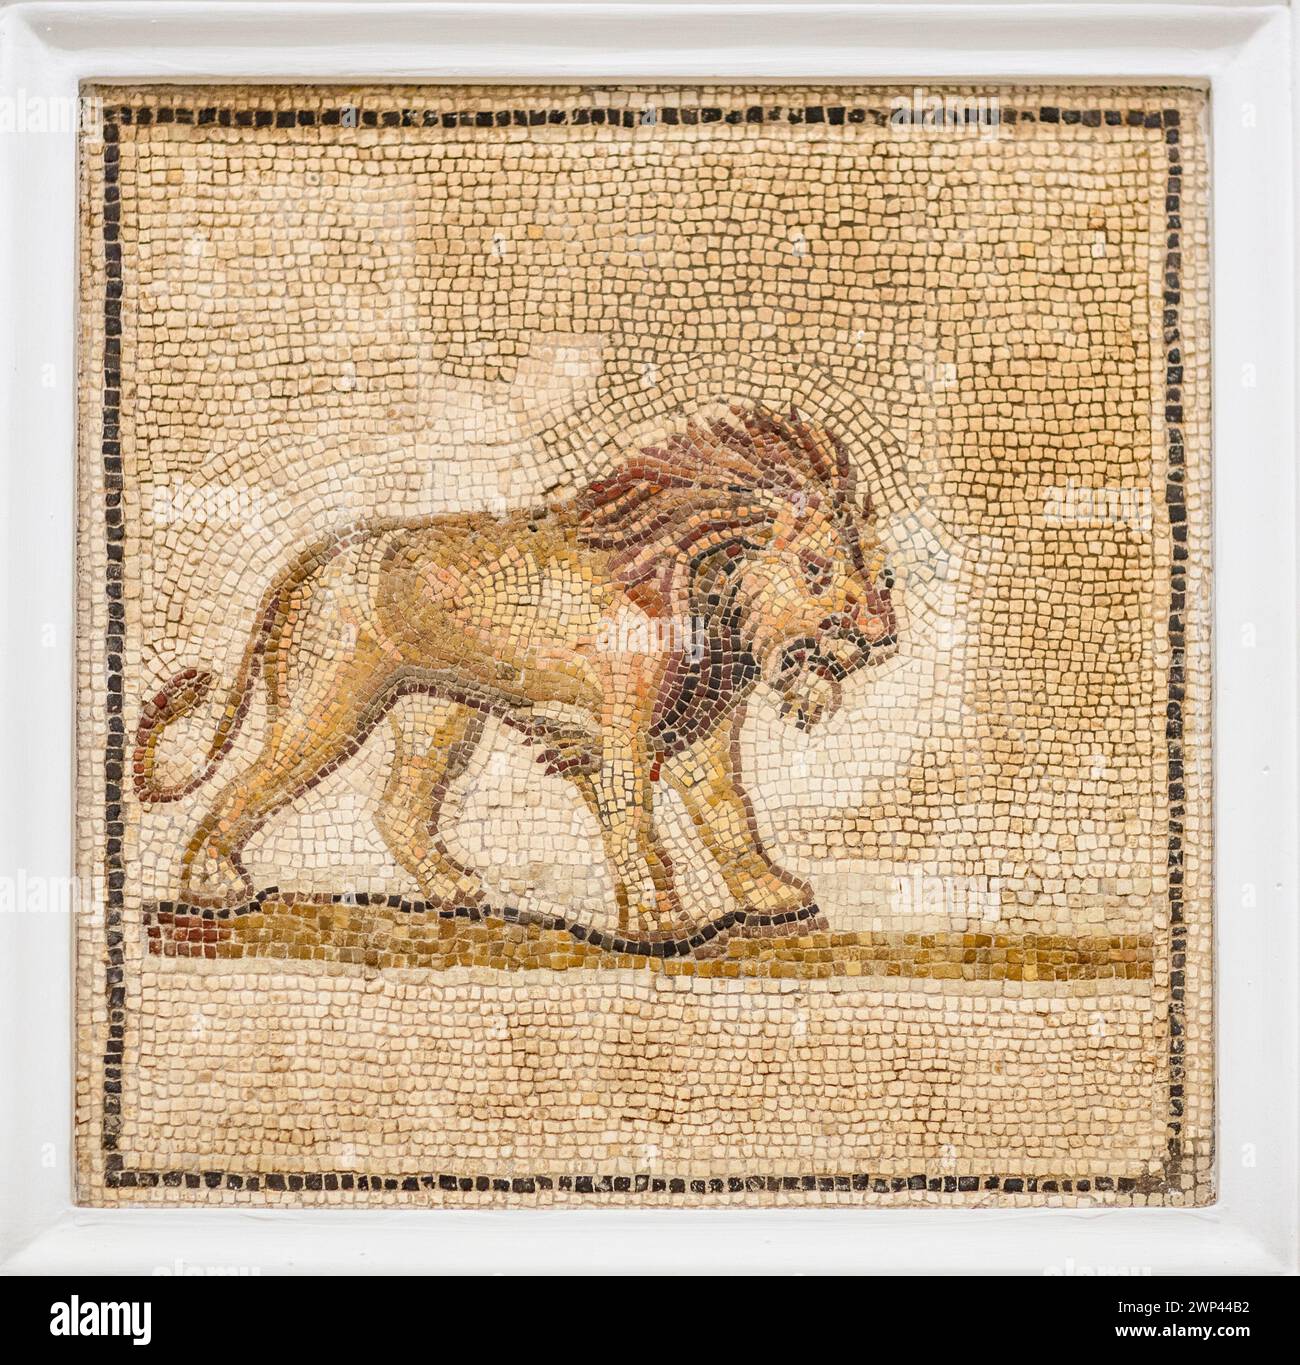 Ancient Roman mosaic of a lion, 3rd-century artwork, exhibited in Seville Archaeological Museum. Stock Photo